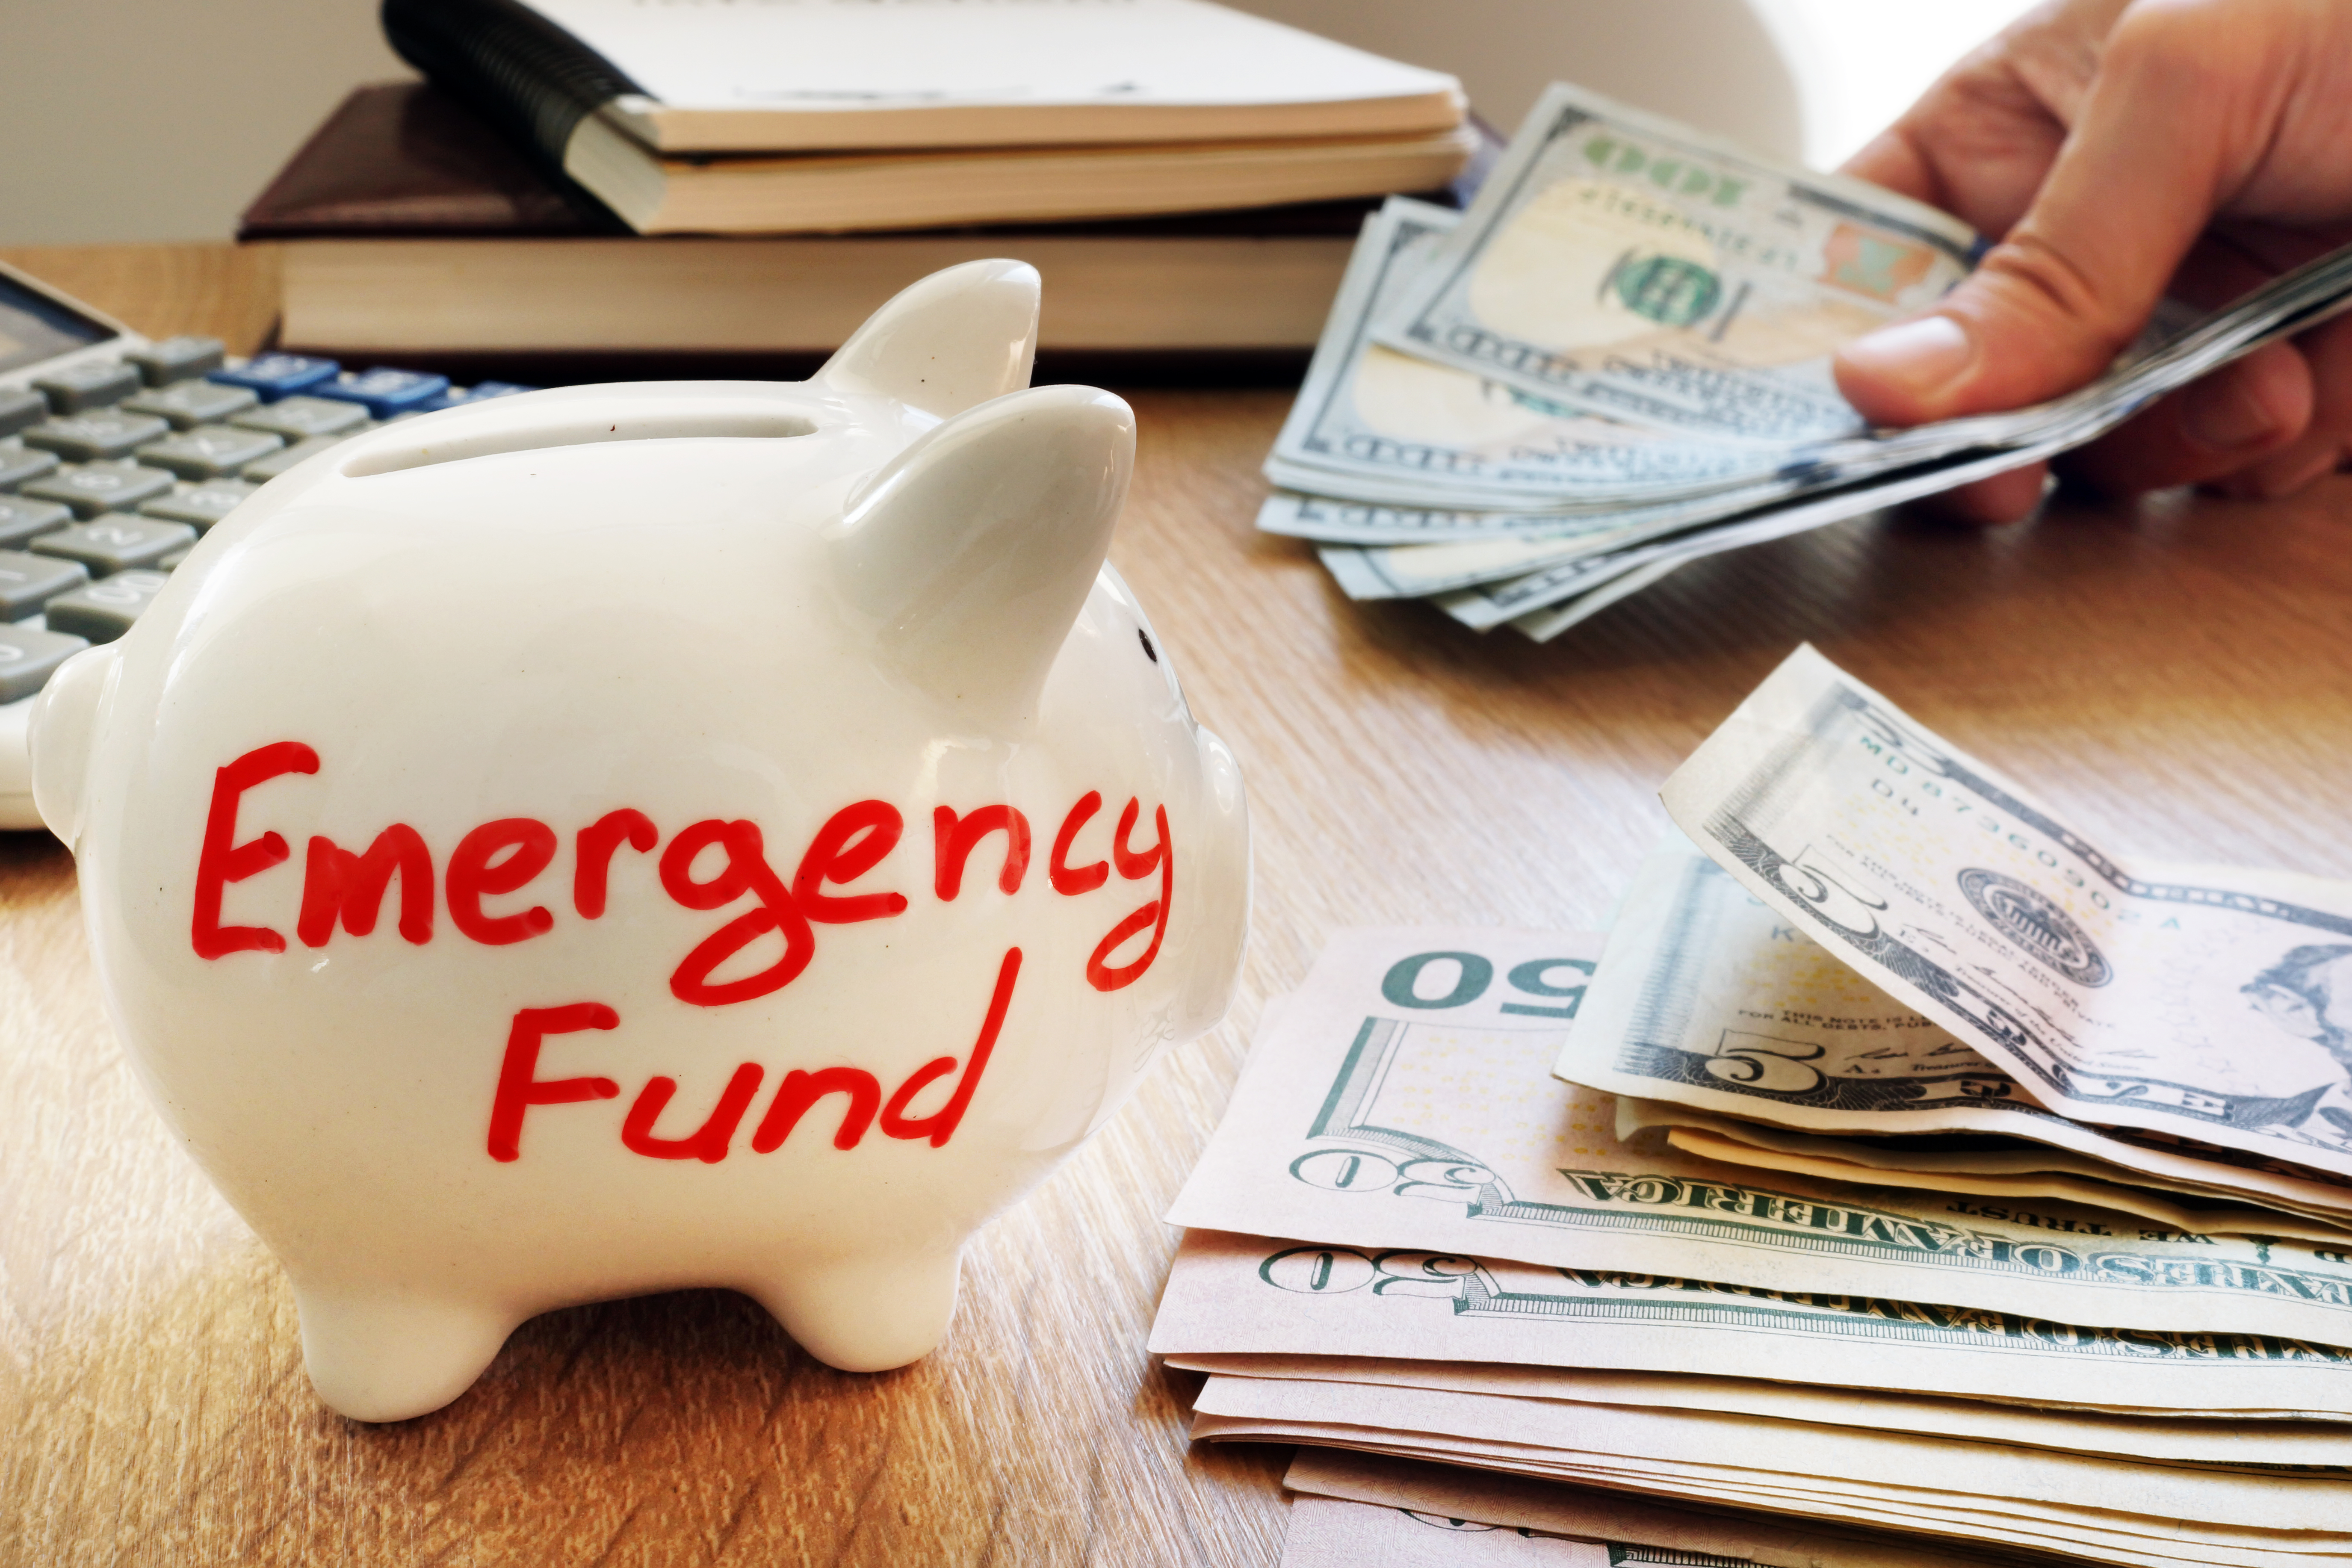 piggy bank with emergency fund written on it next to a pile of money